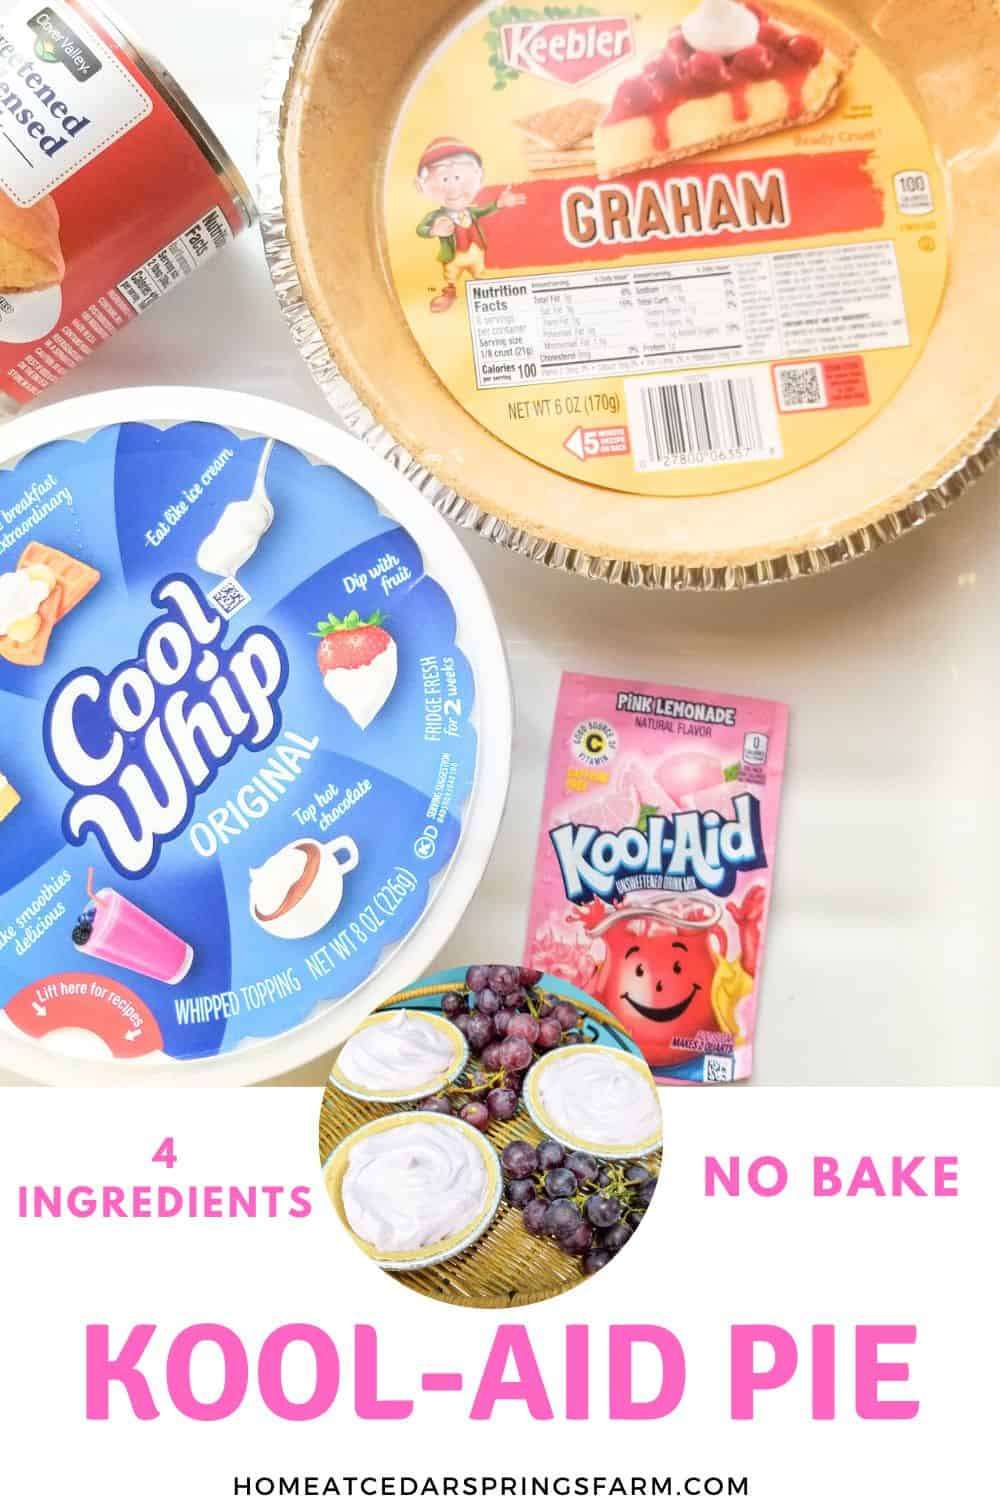 Ingredients shown for No Bake Kool-Aid Pie with text overlay.